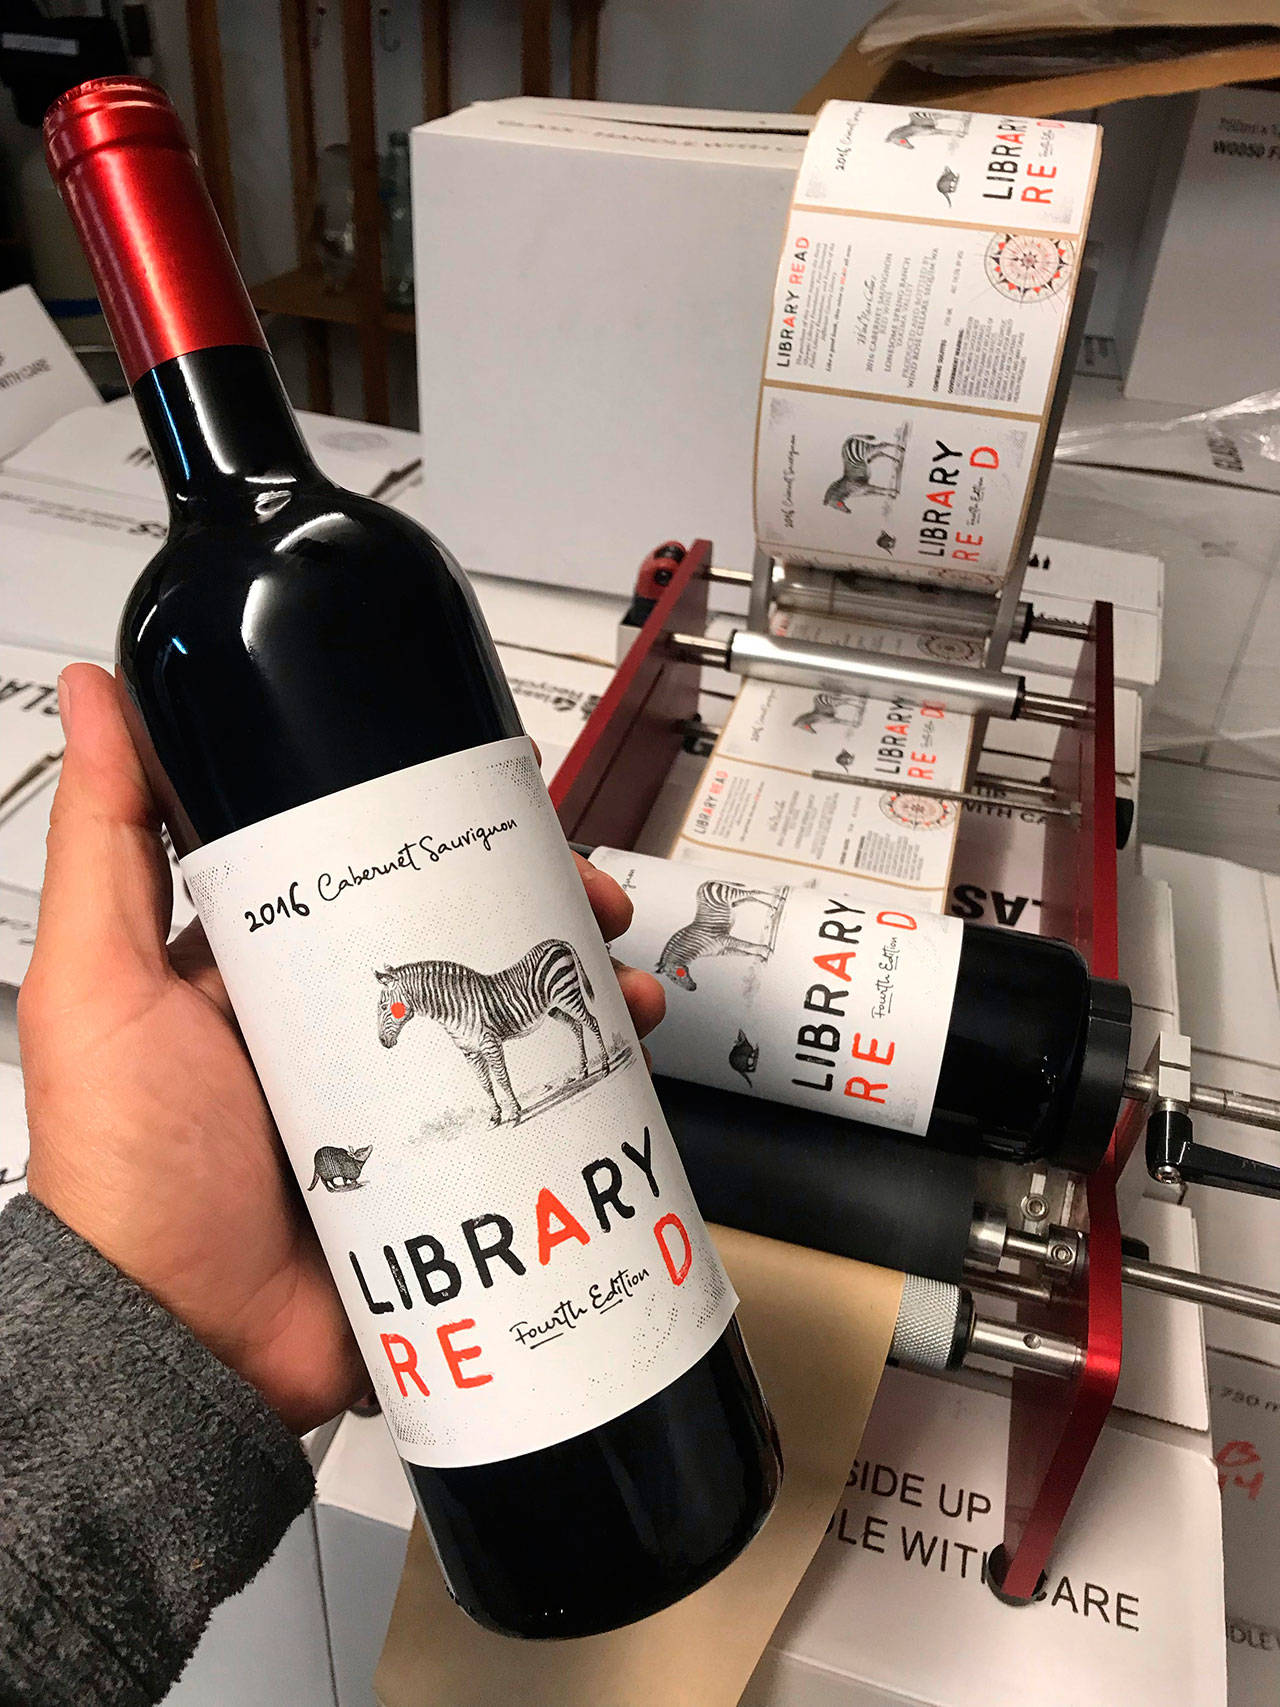 The newest edition of the Library REaD wine supports libraries in Clallam and Jefferson counties. Submitted photo